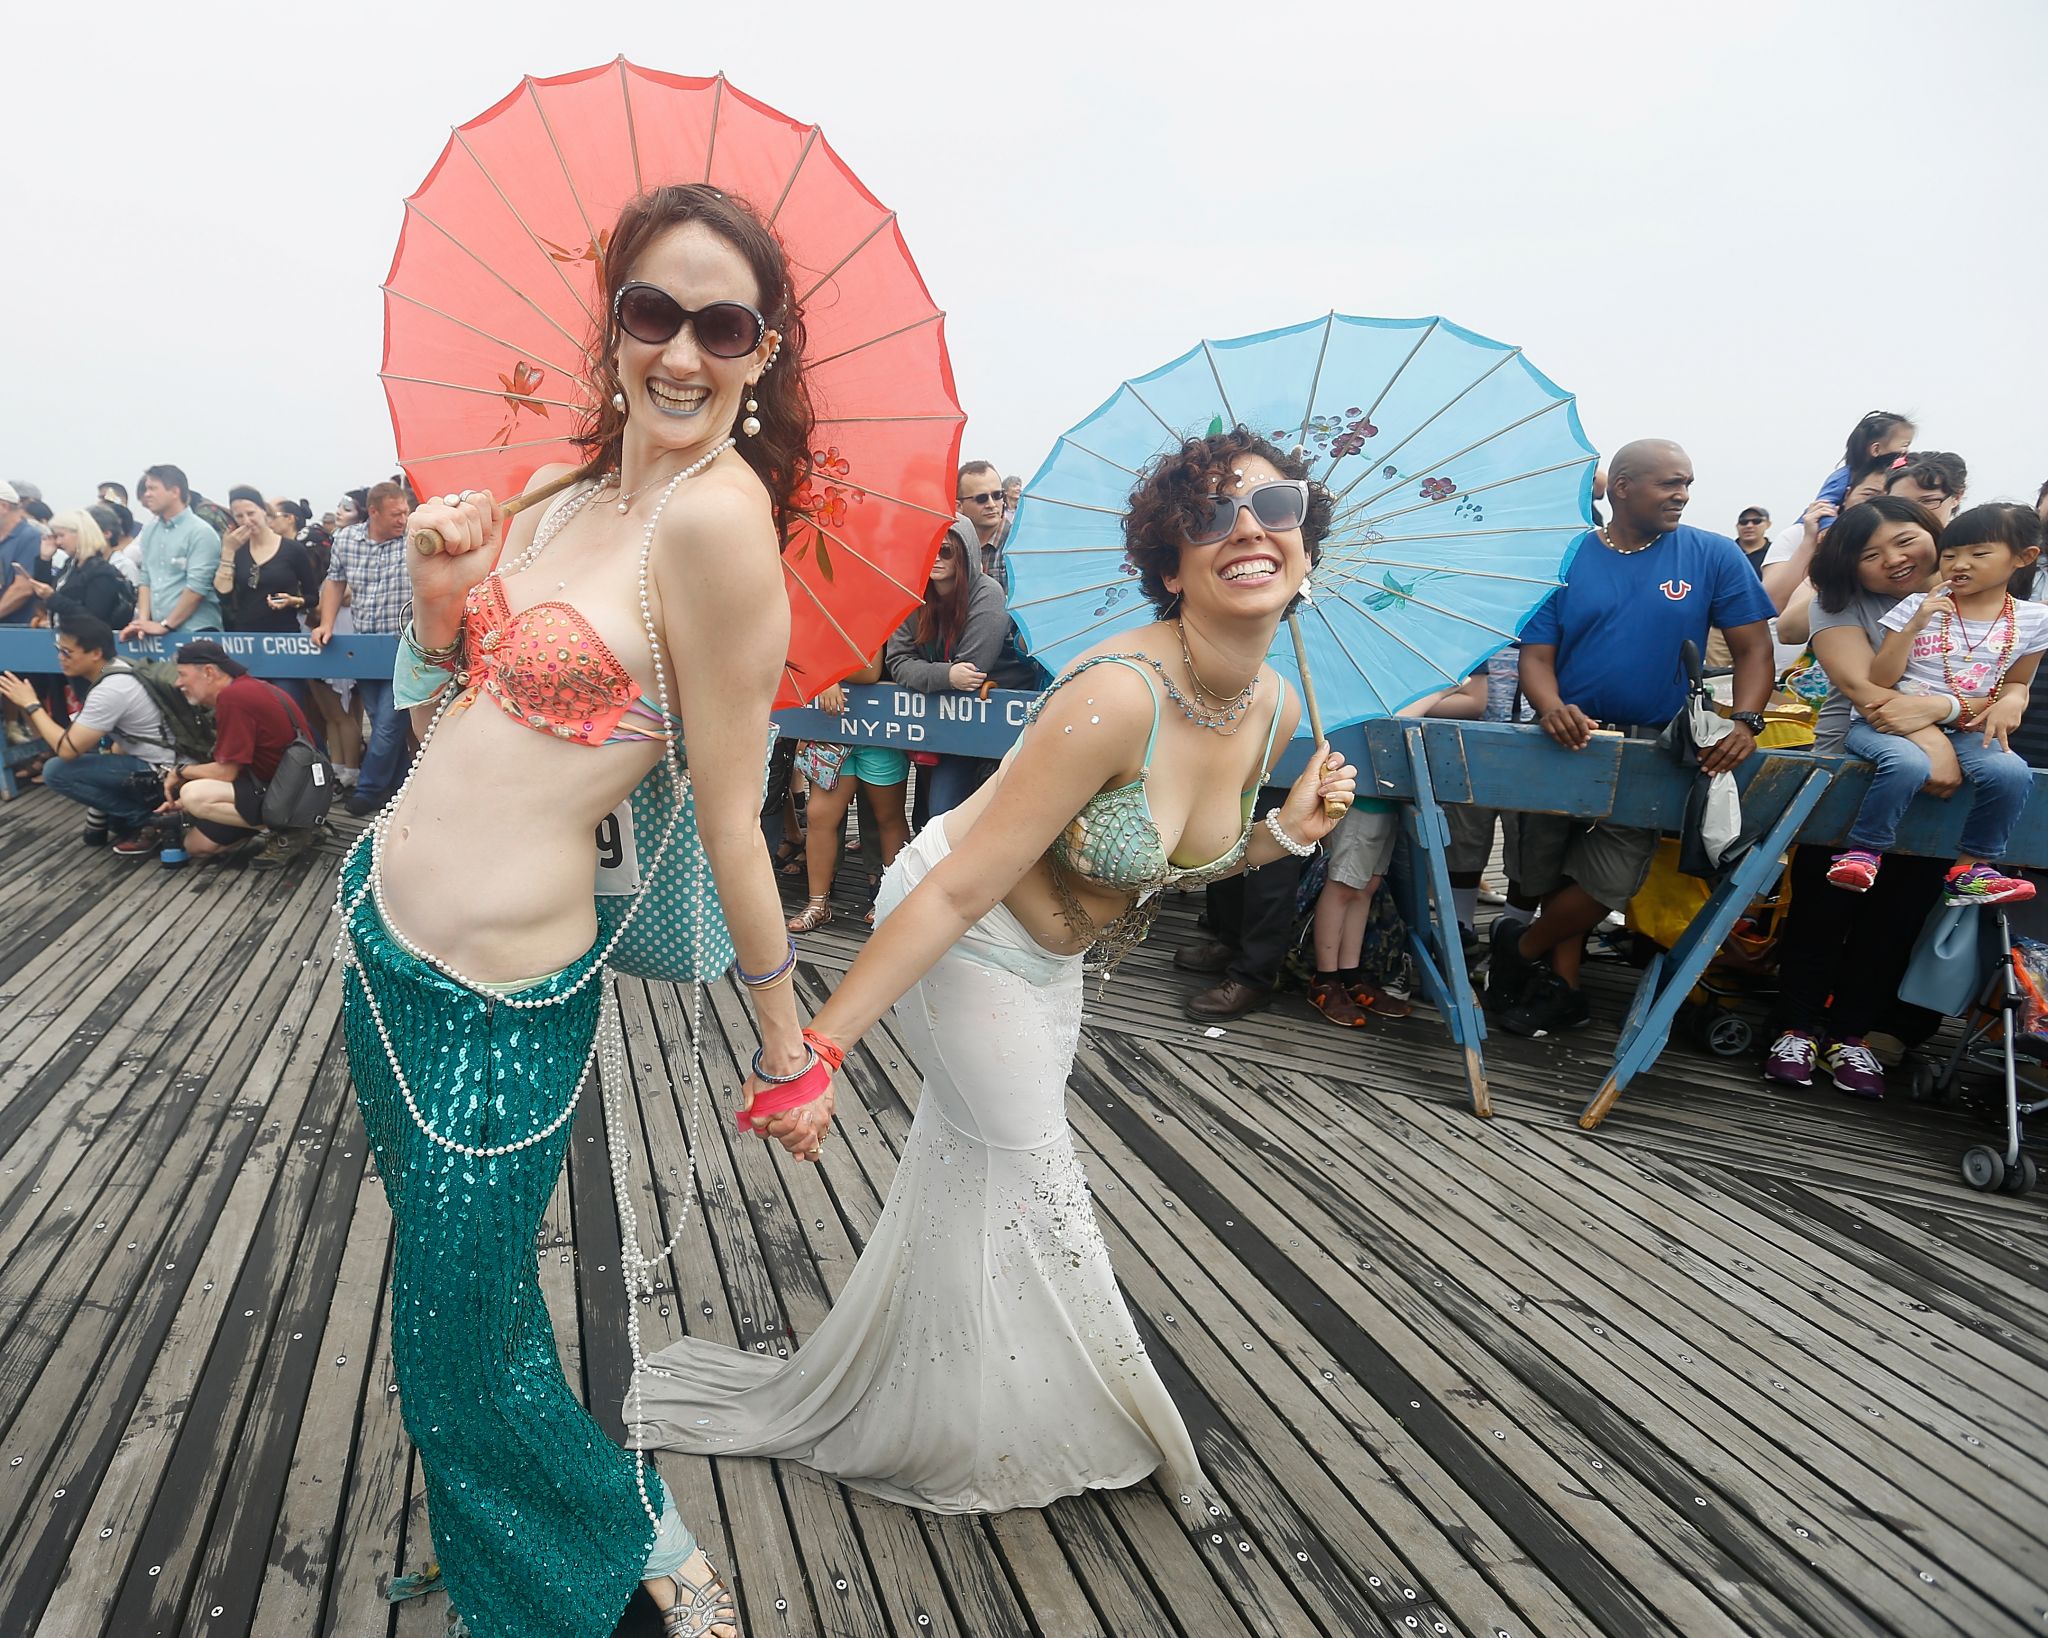 Coney Island’s 35th annual Mermaid Parade shows what it would look like